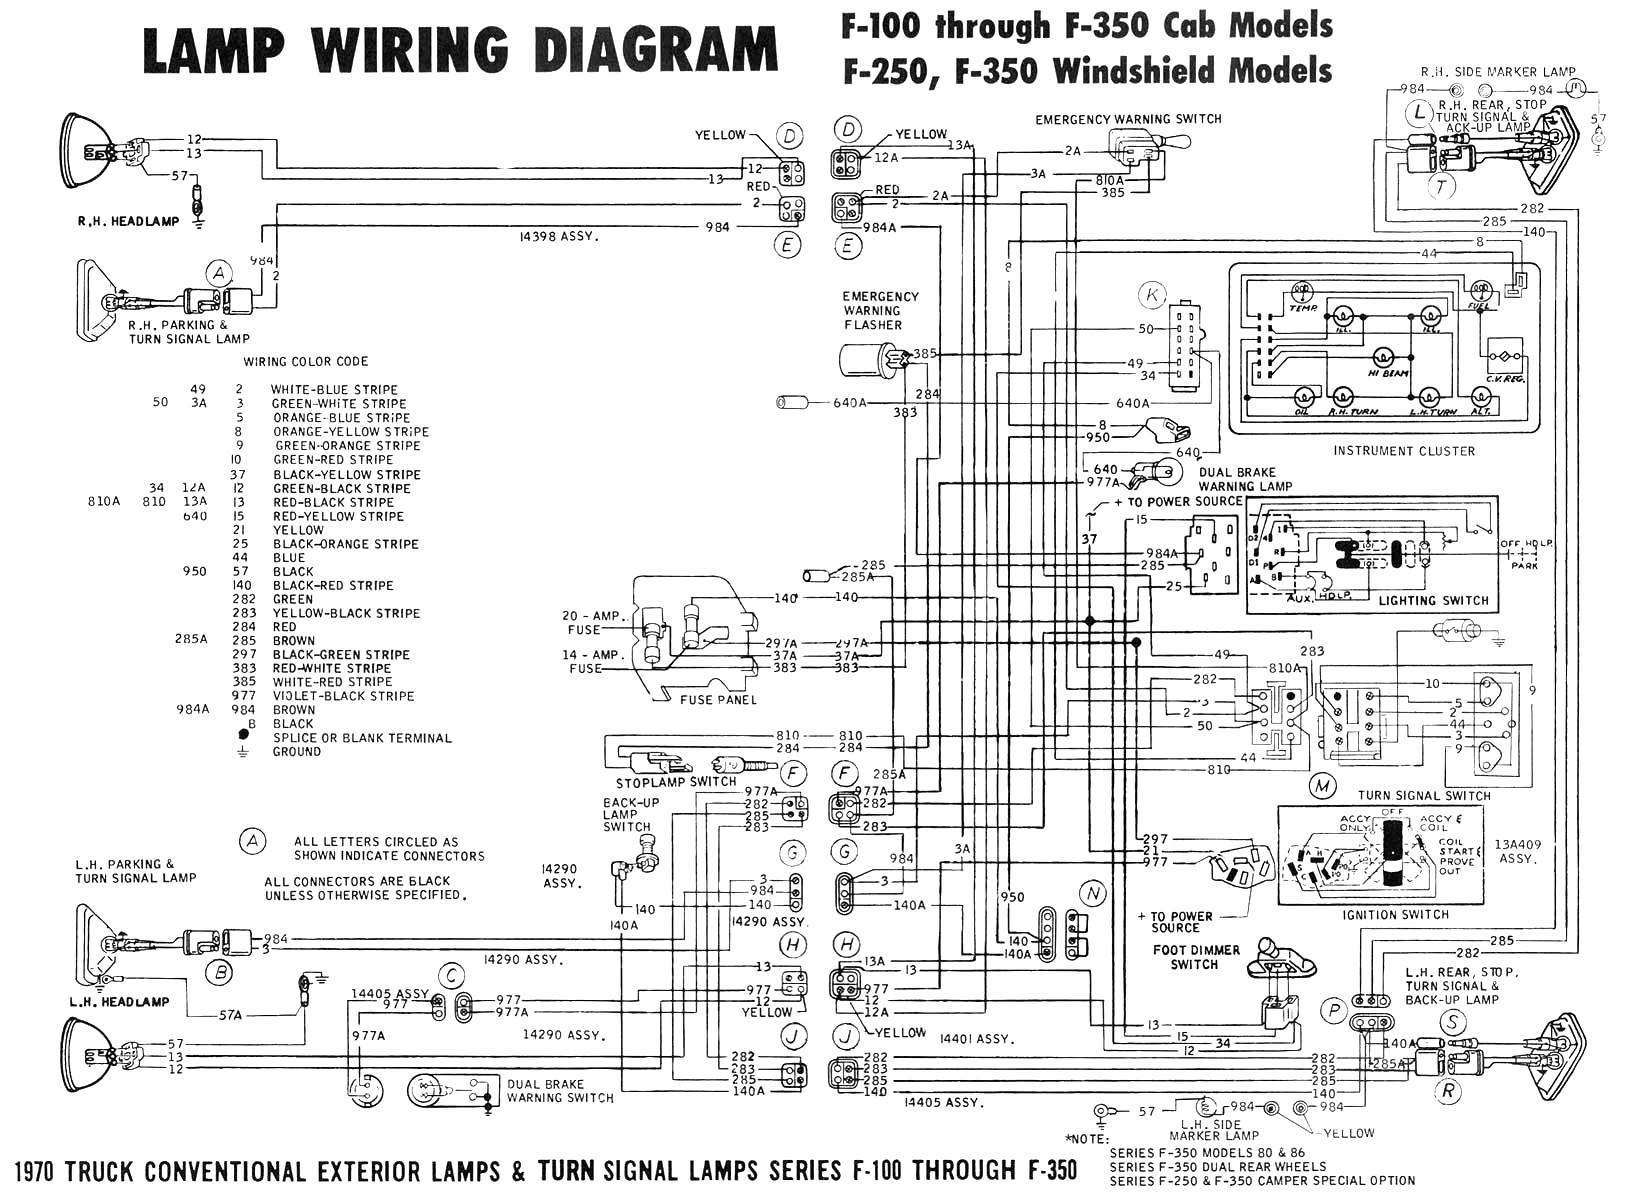 wiring diagram and electrical system troubleshooting 85 95 wiring wiring diagram electrical system troubleshooting diagram schematic